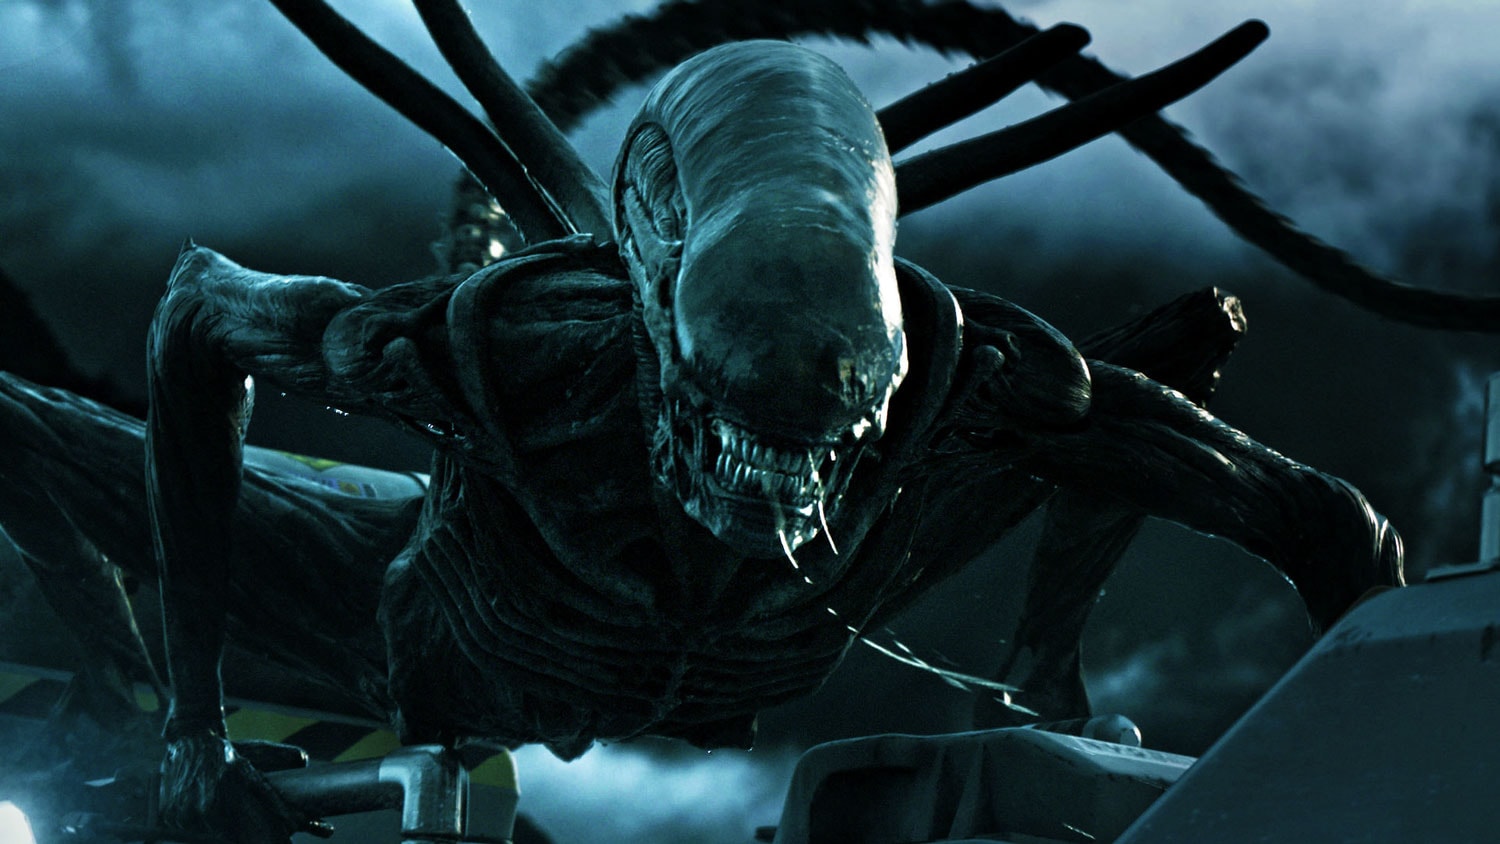 New-Alien-Movie-In-The-Works---Ridley-Scott-Producing